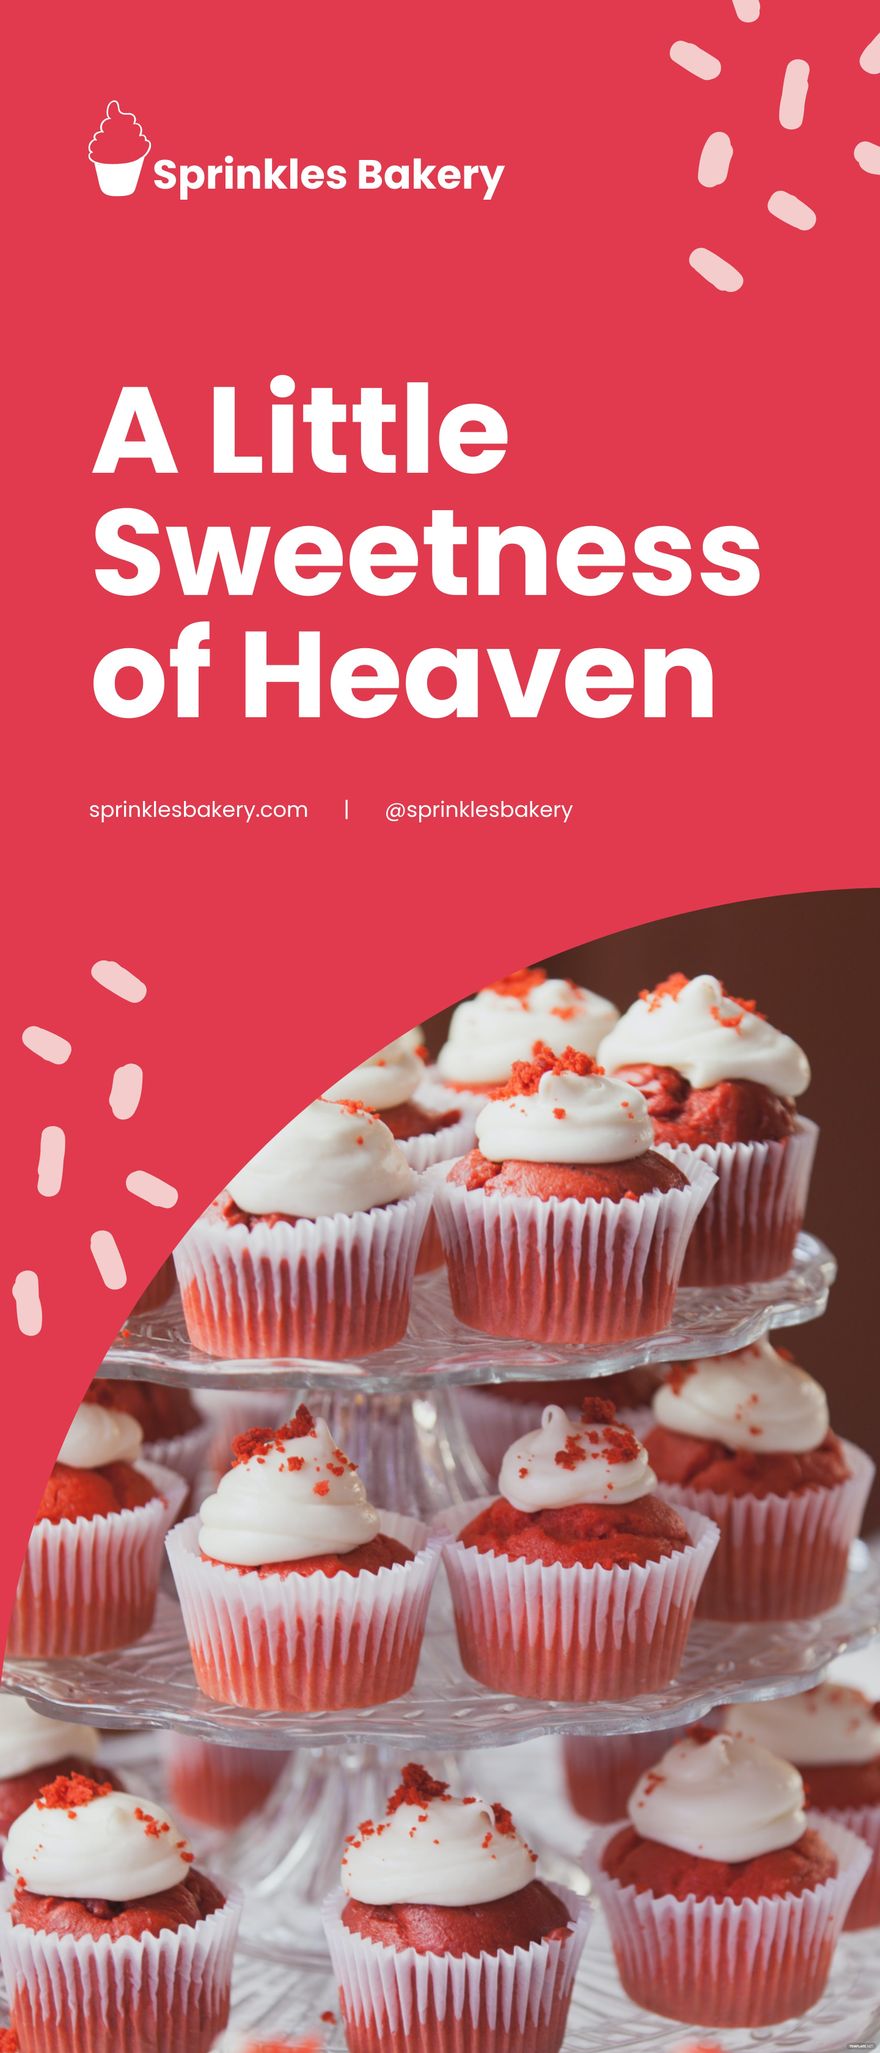 Cupcake Rollup Banner Template